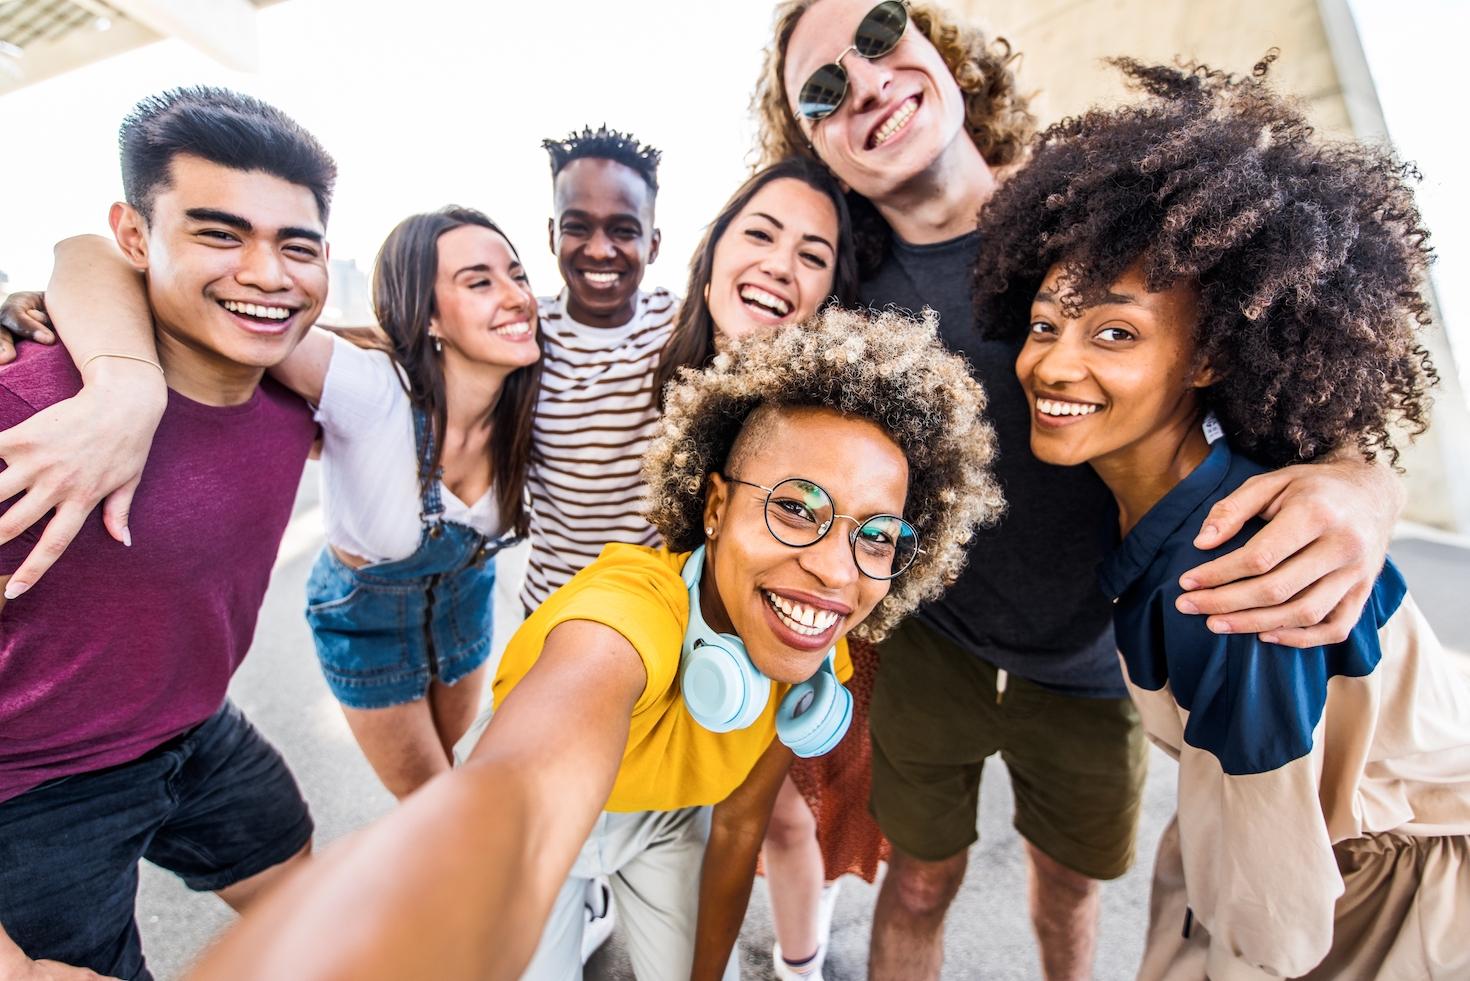 Recruiting Gen Z? Top 7 trends you can’t ignore